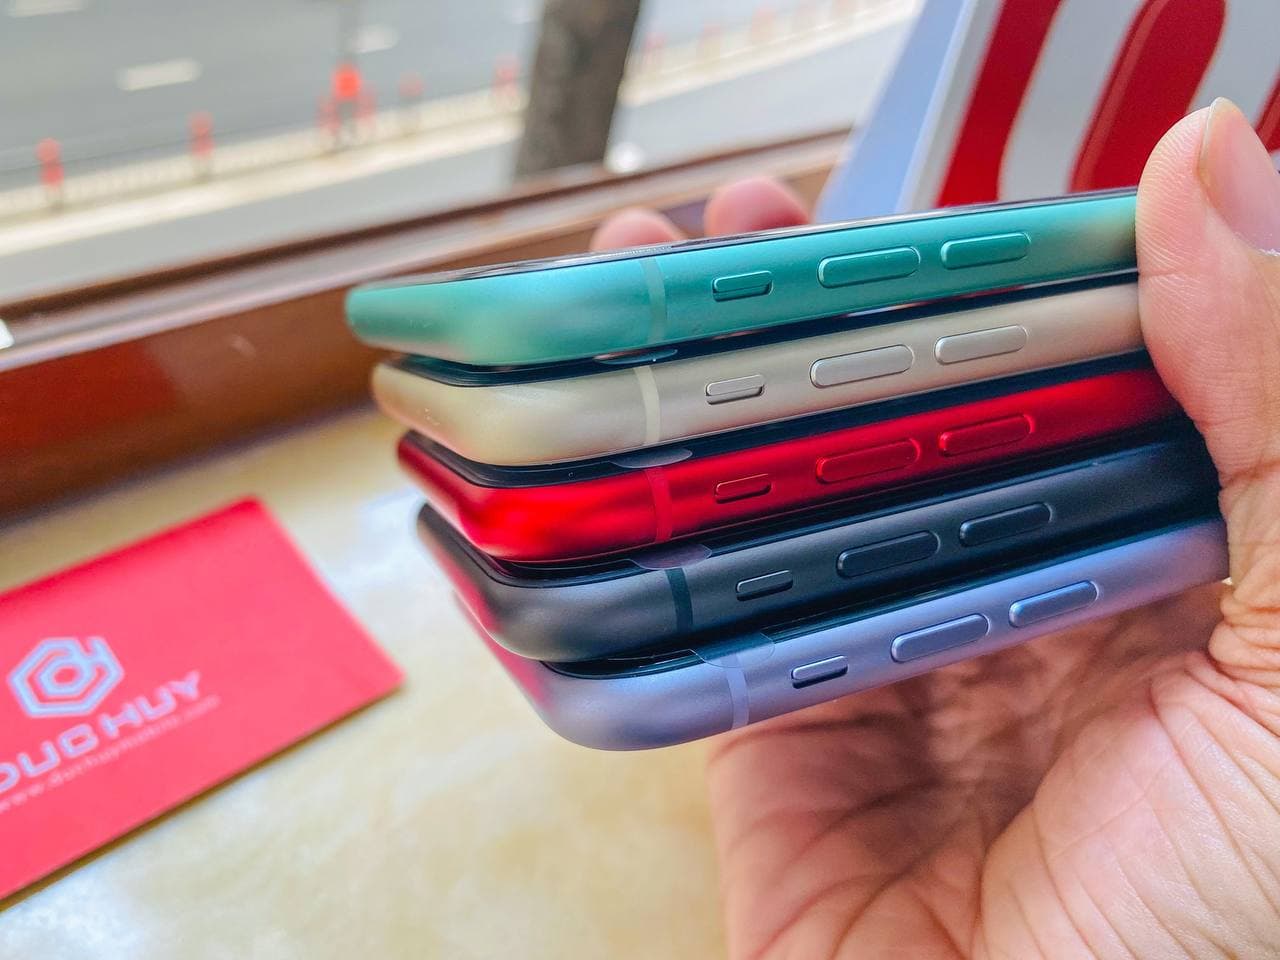 thiết kế iPhone 11